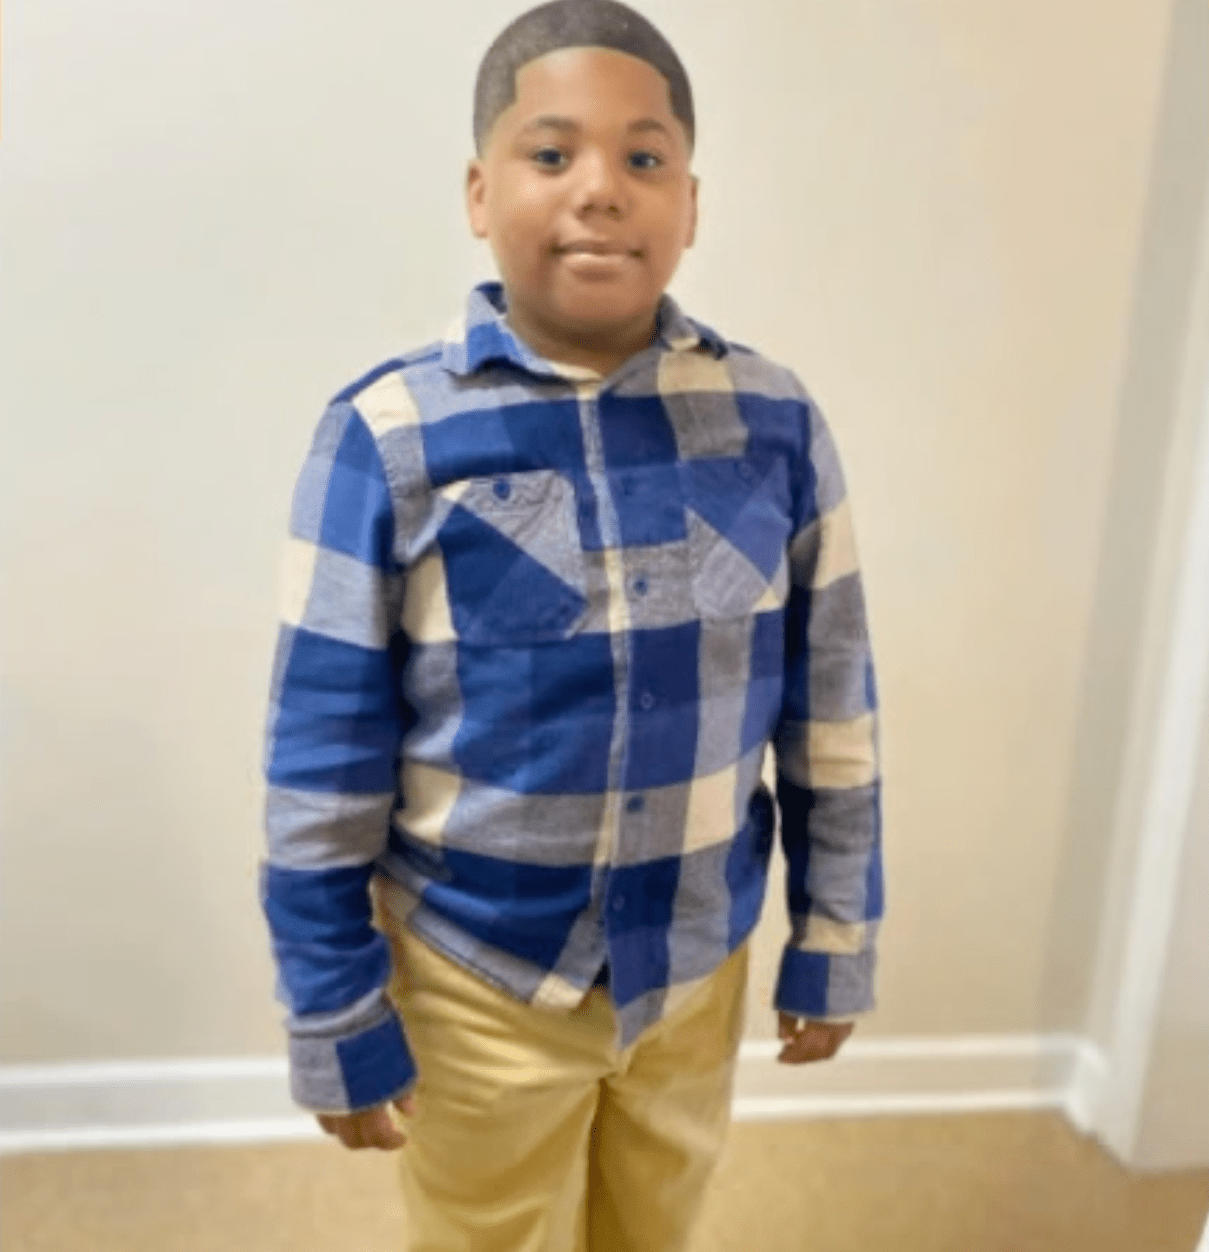 Black Lives Matter: 11-Year-Old Aderrien Murry Shot By Indianola, Mississippi Cop Greg Capers During Domestic Disturbance Call